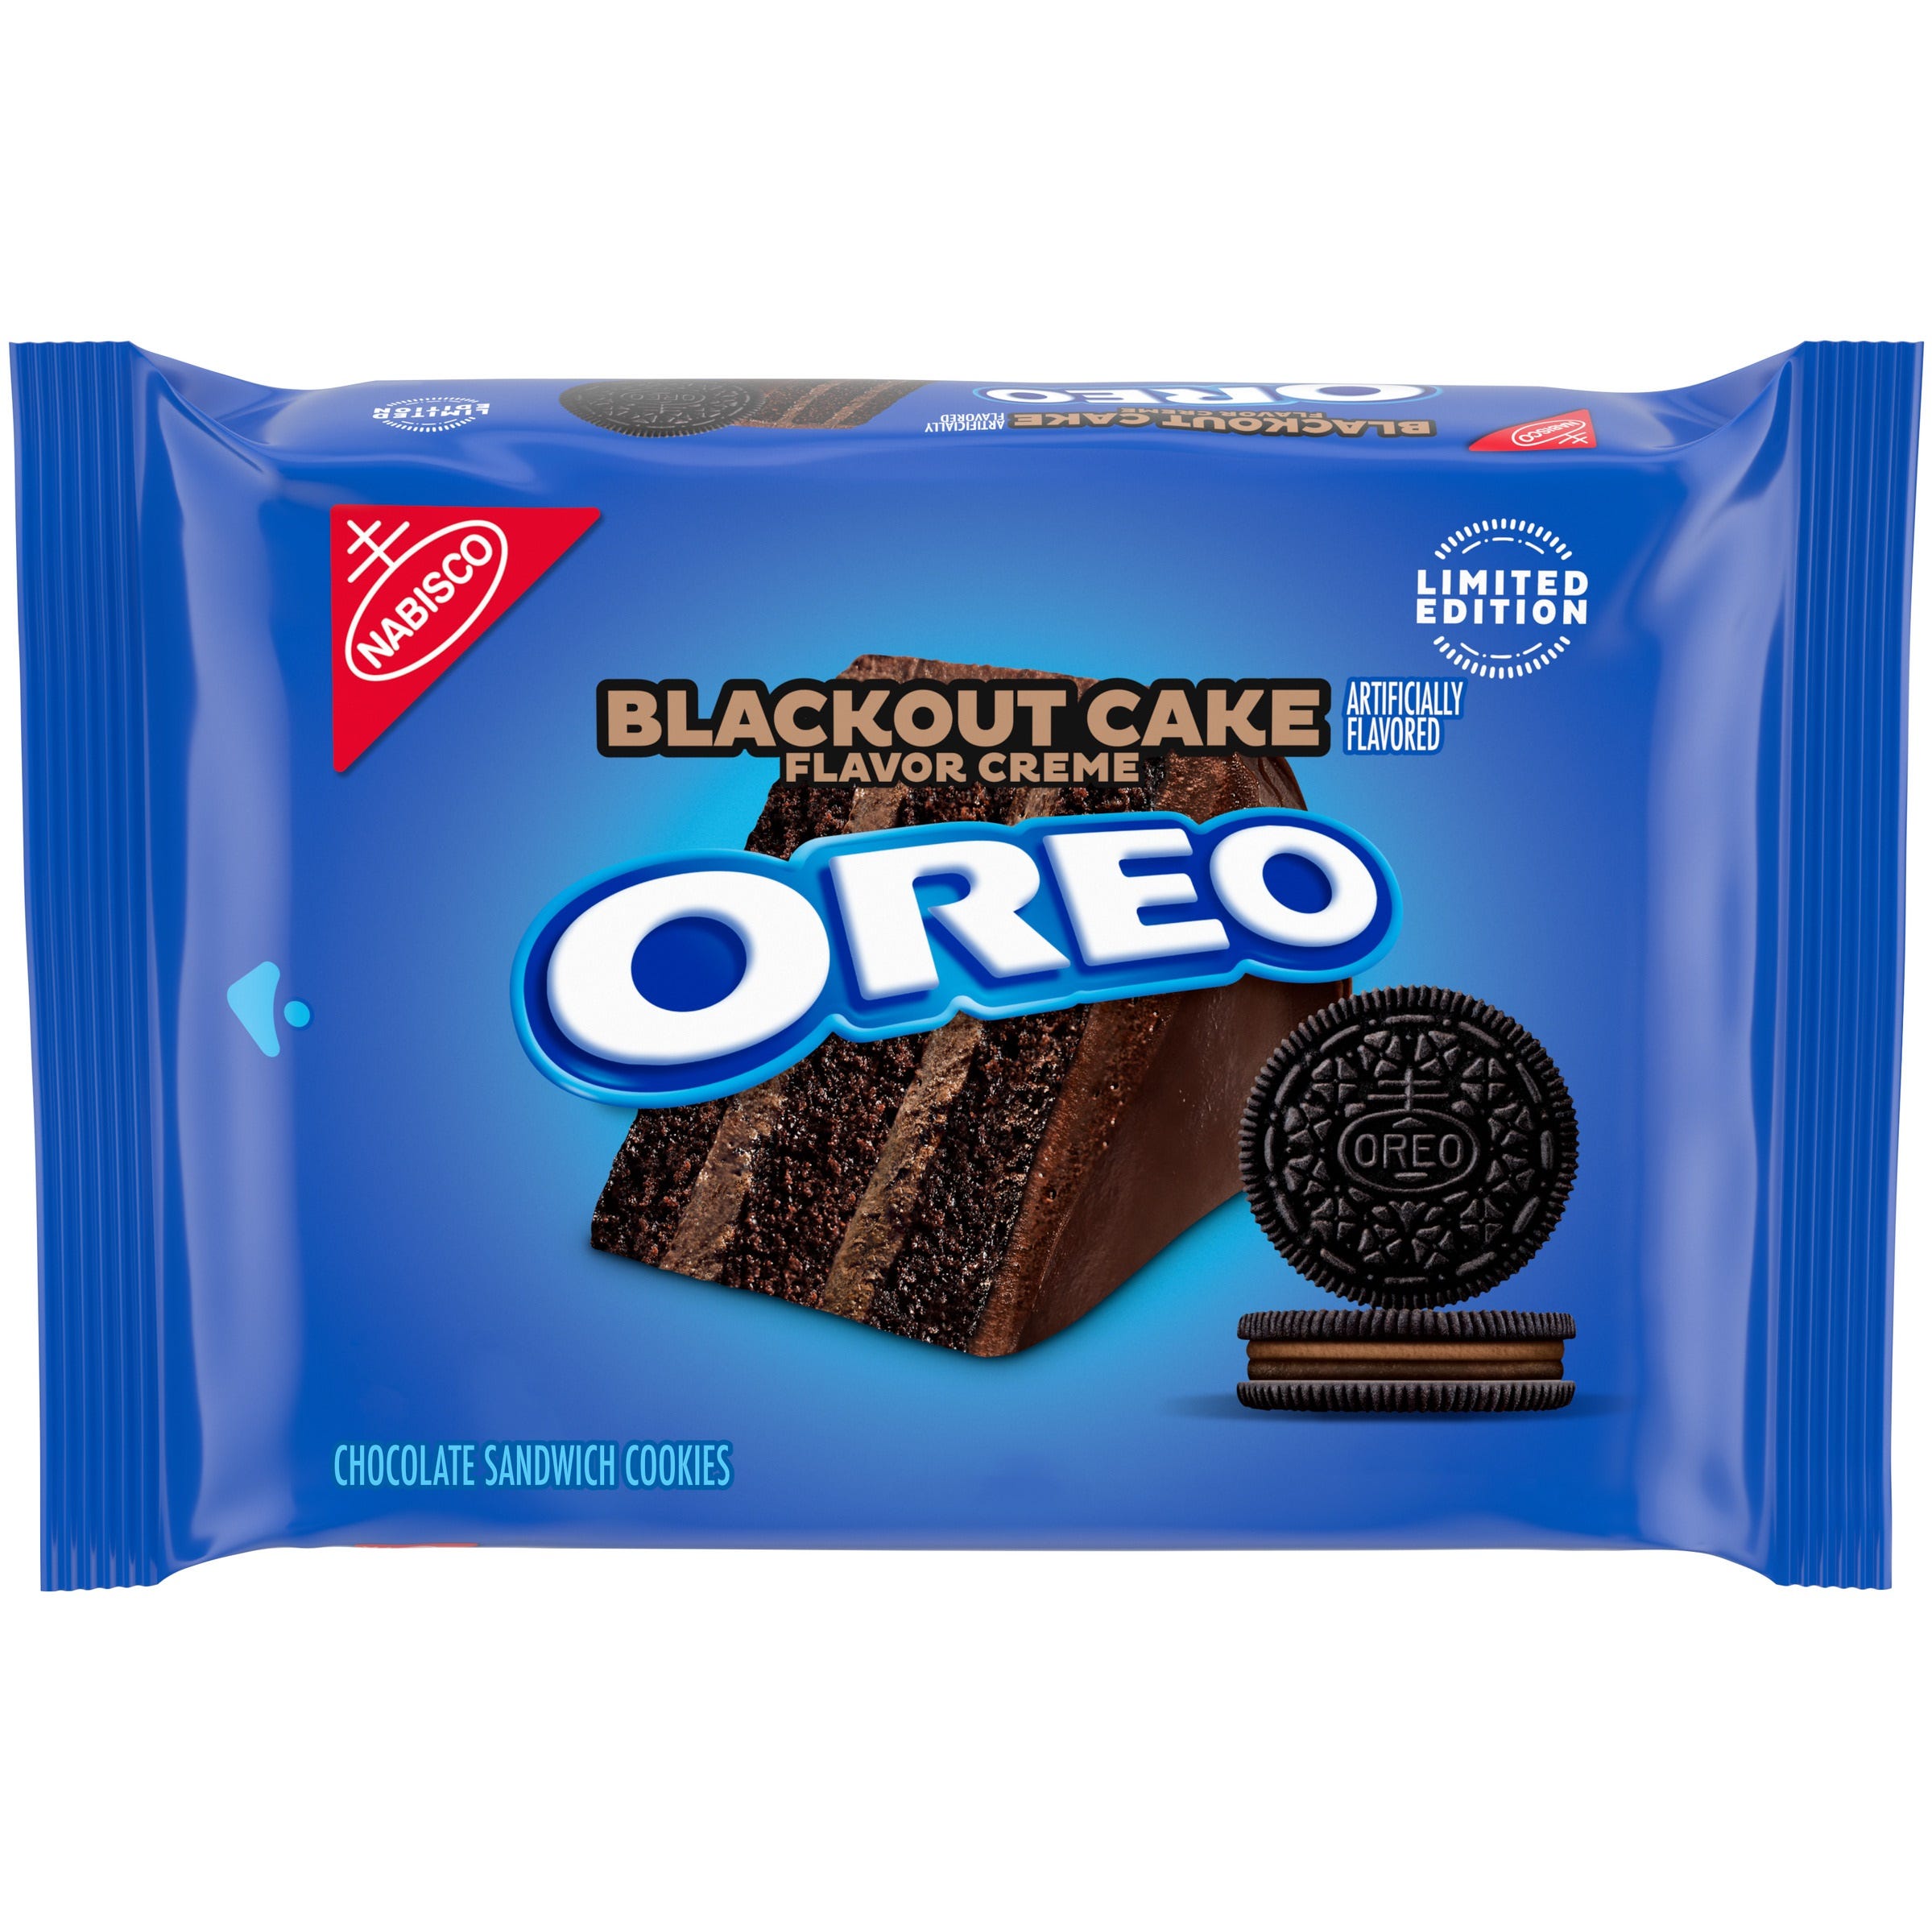 Oreo Blackout Cake cookies, a new limited-edition Oreo, hit shelves April 3. The cookie has a layer of chocolate cake flavor creme on top of a layer of dark chocolate cake flavor creme.